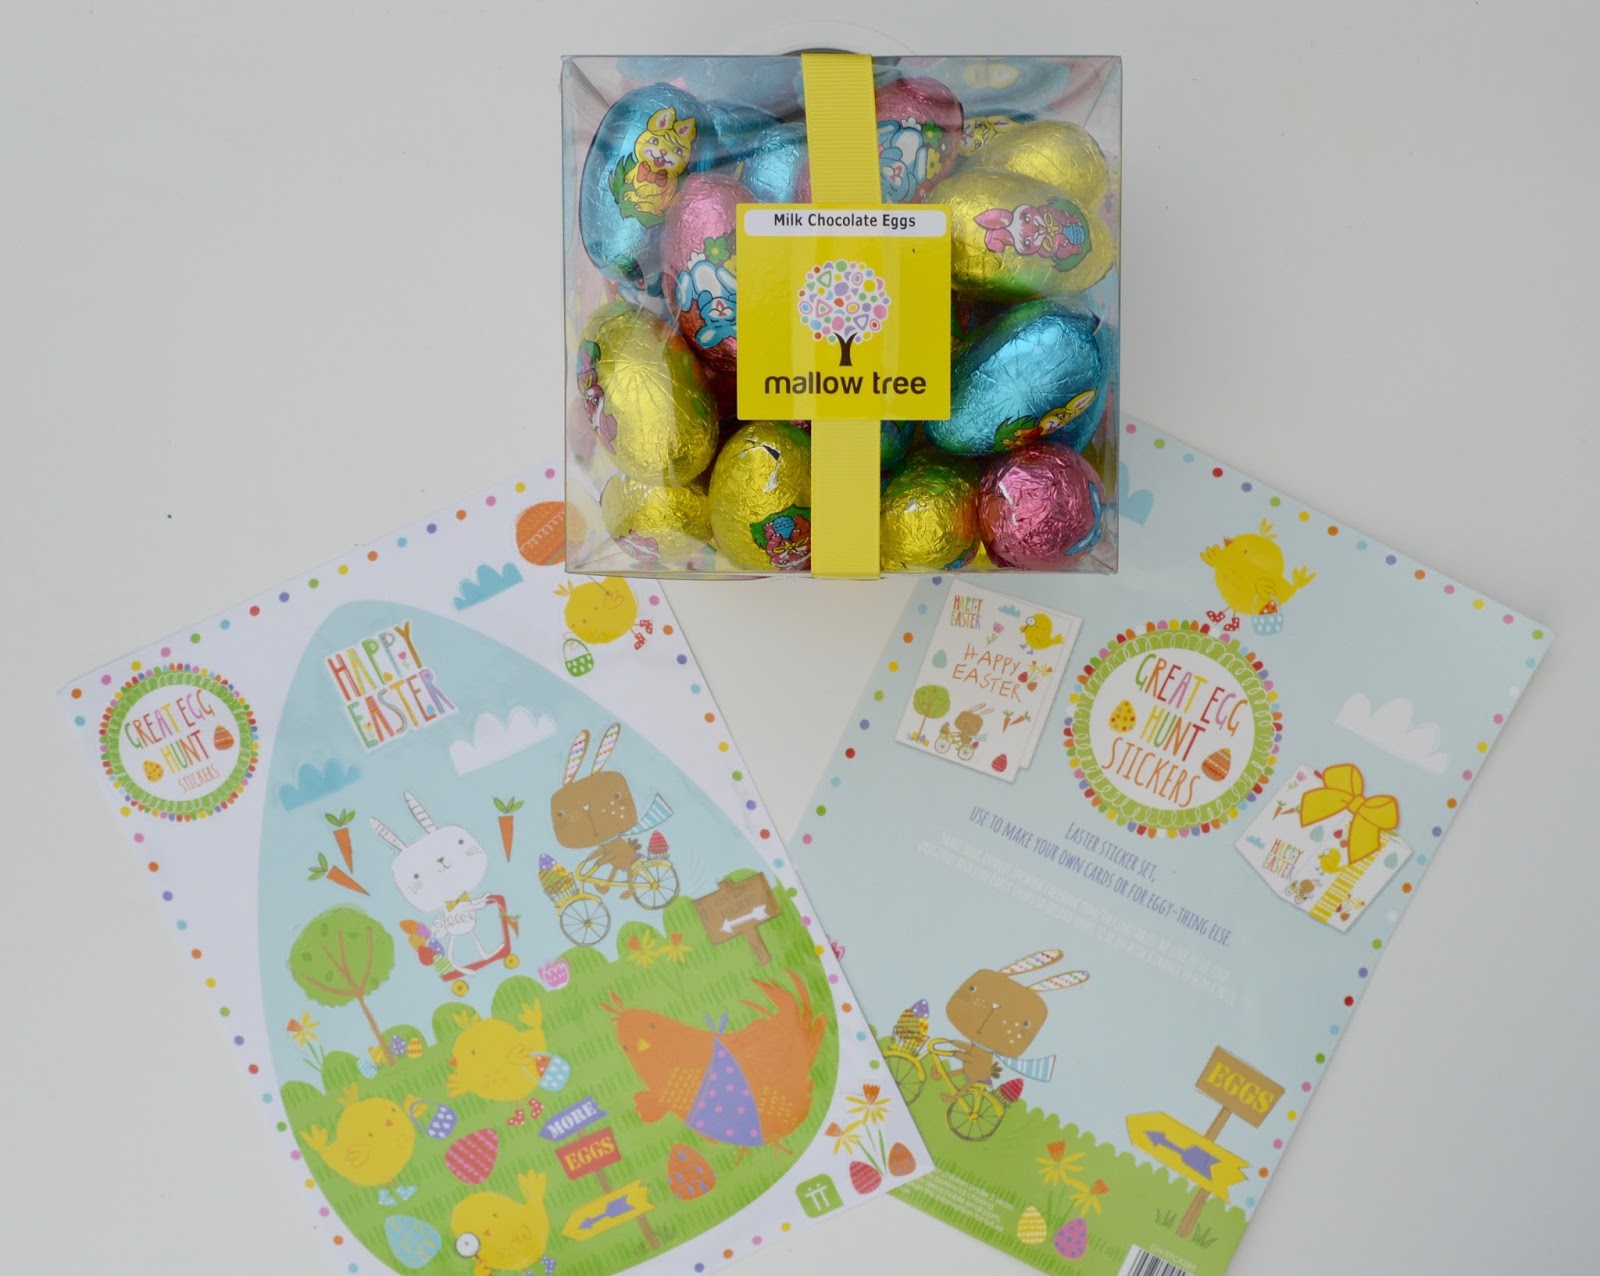 6 questions your children may ask about UK Easter traditions  - egg hunt stickers and eggs